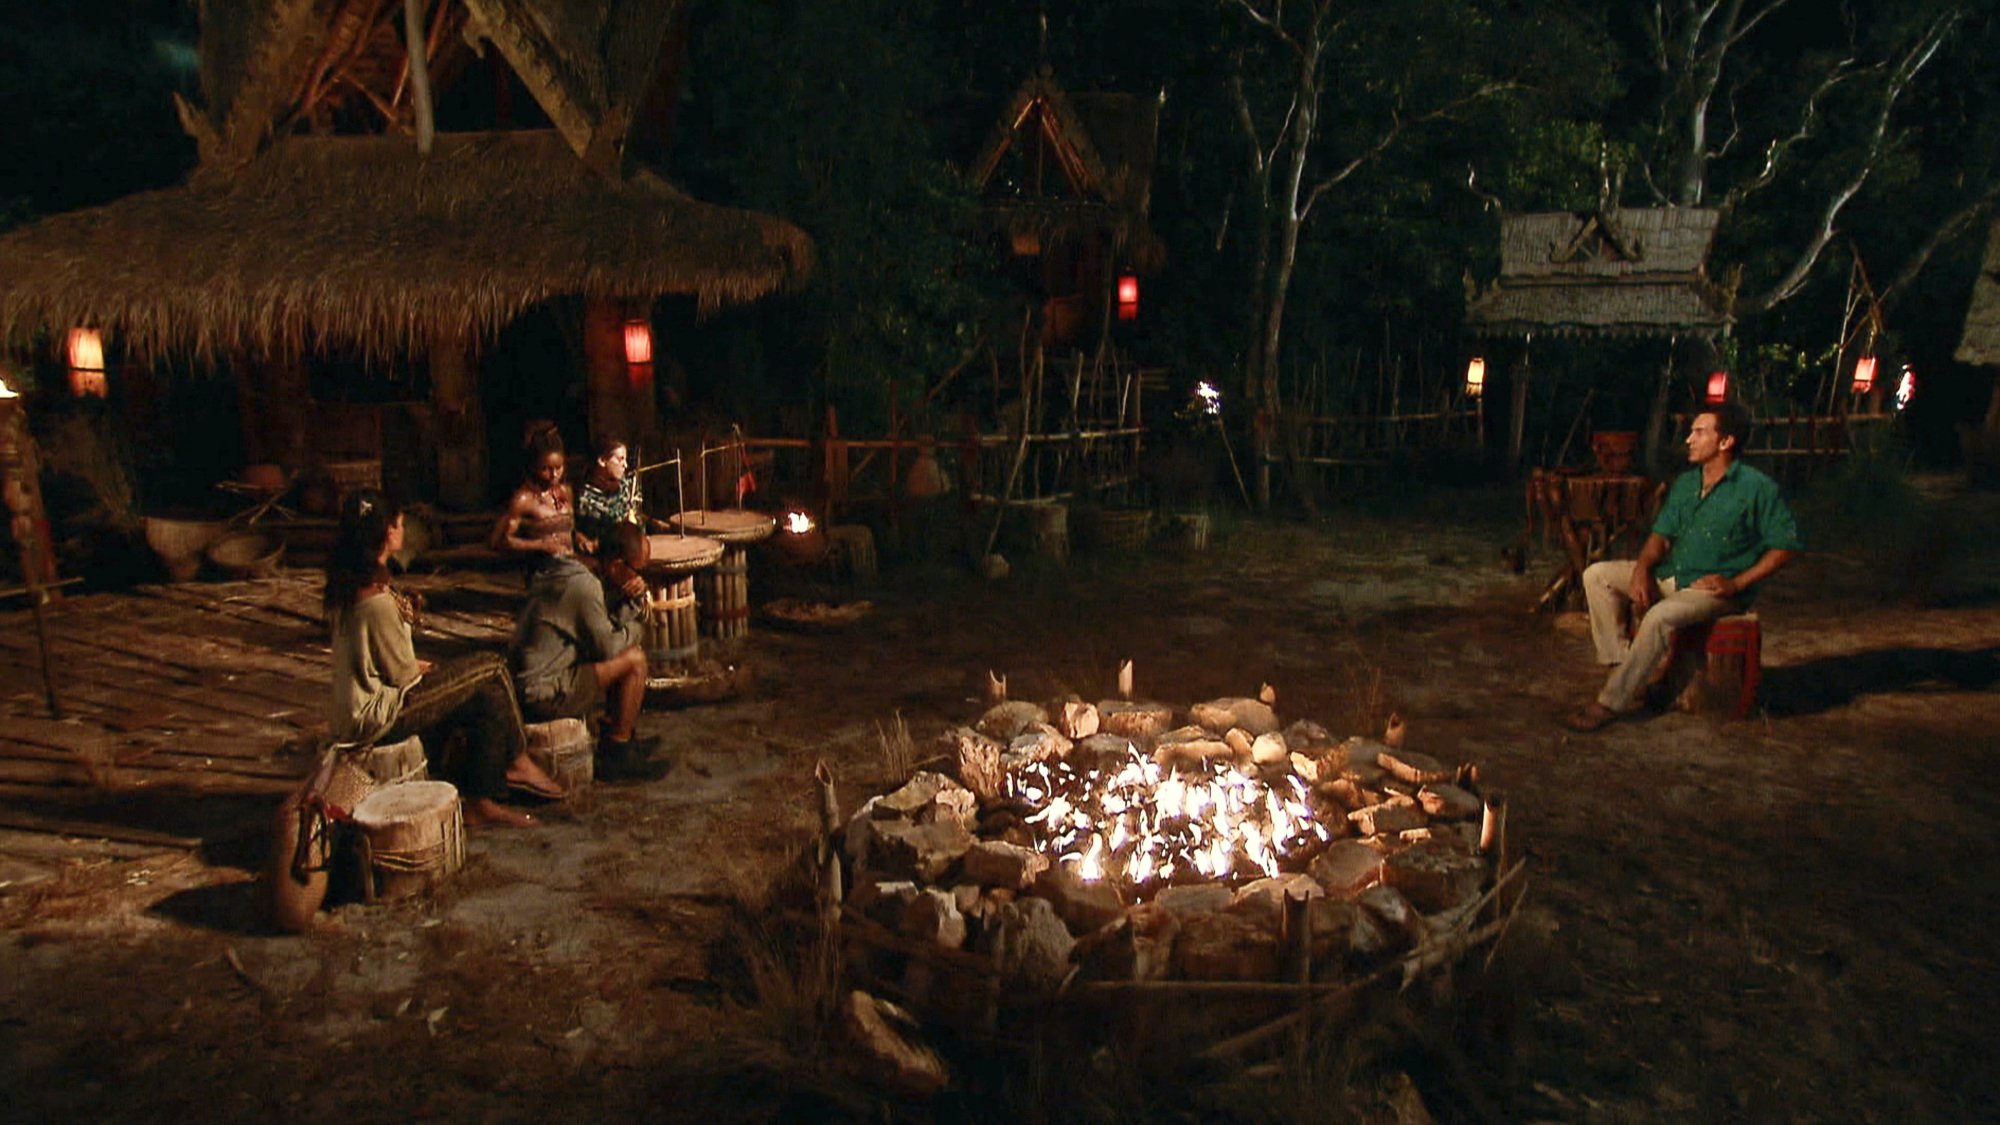 'Survivor' tribal council with contestants to the left, a fire pit in the middle, and Jeff Probst to the right